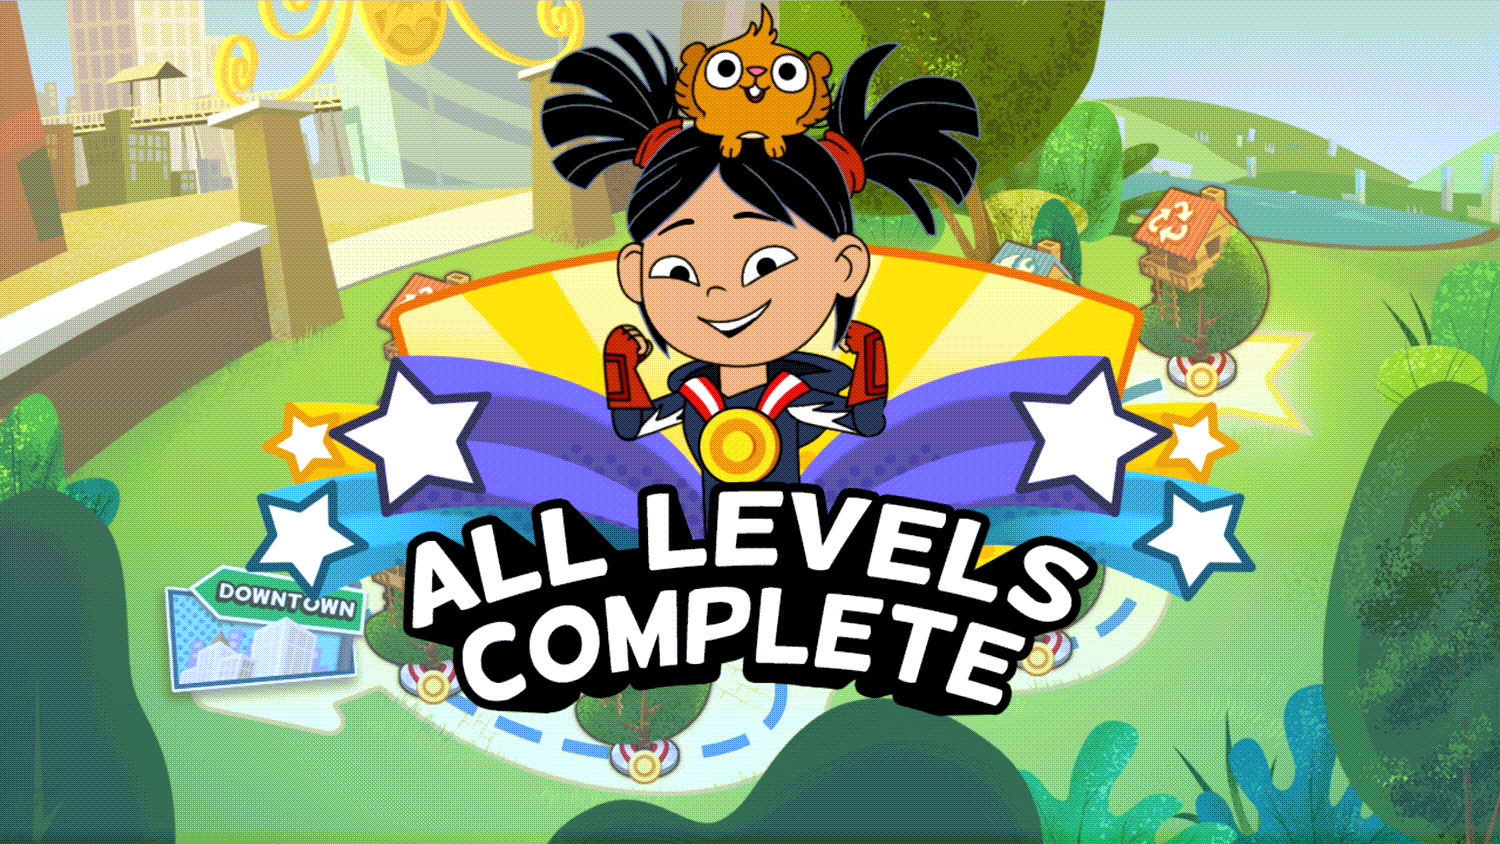 Hero Elementary Treehouse Trouble Game Complete Screenshot.